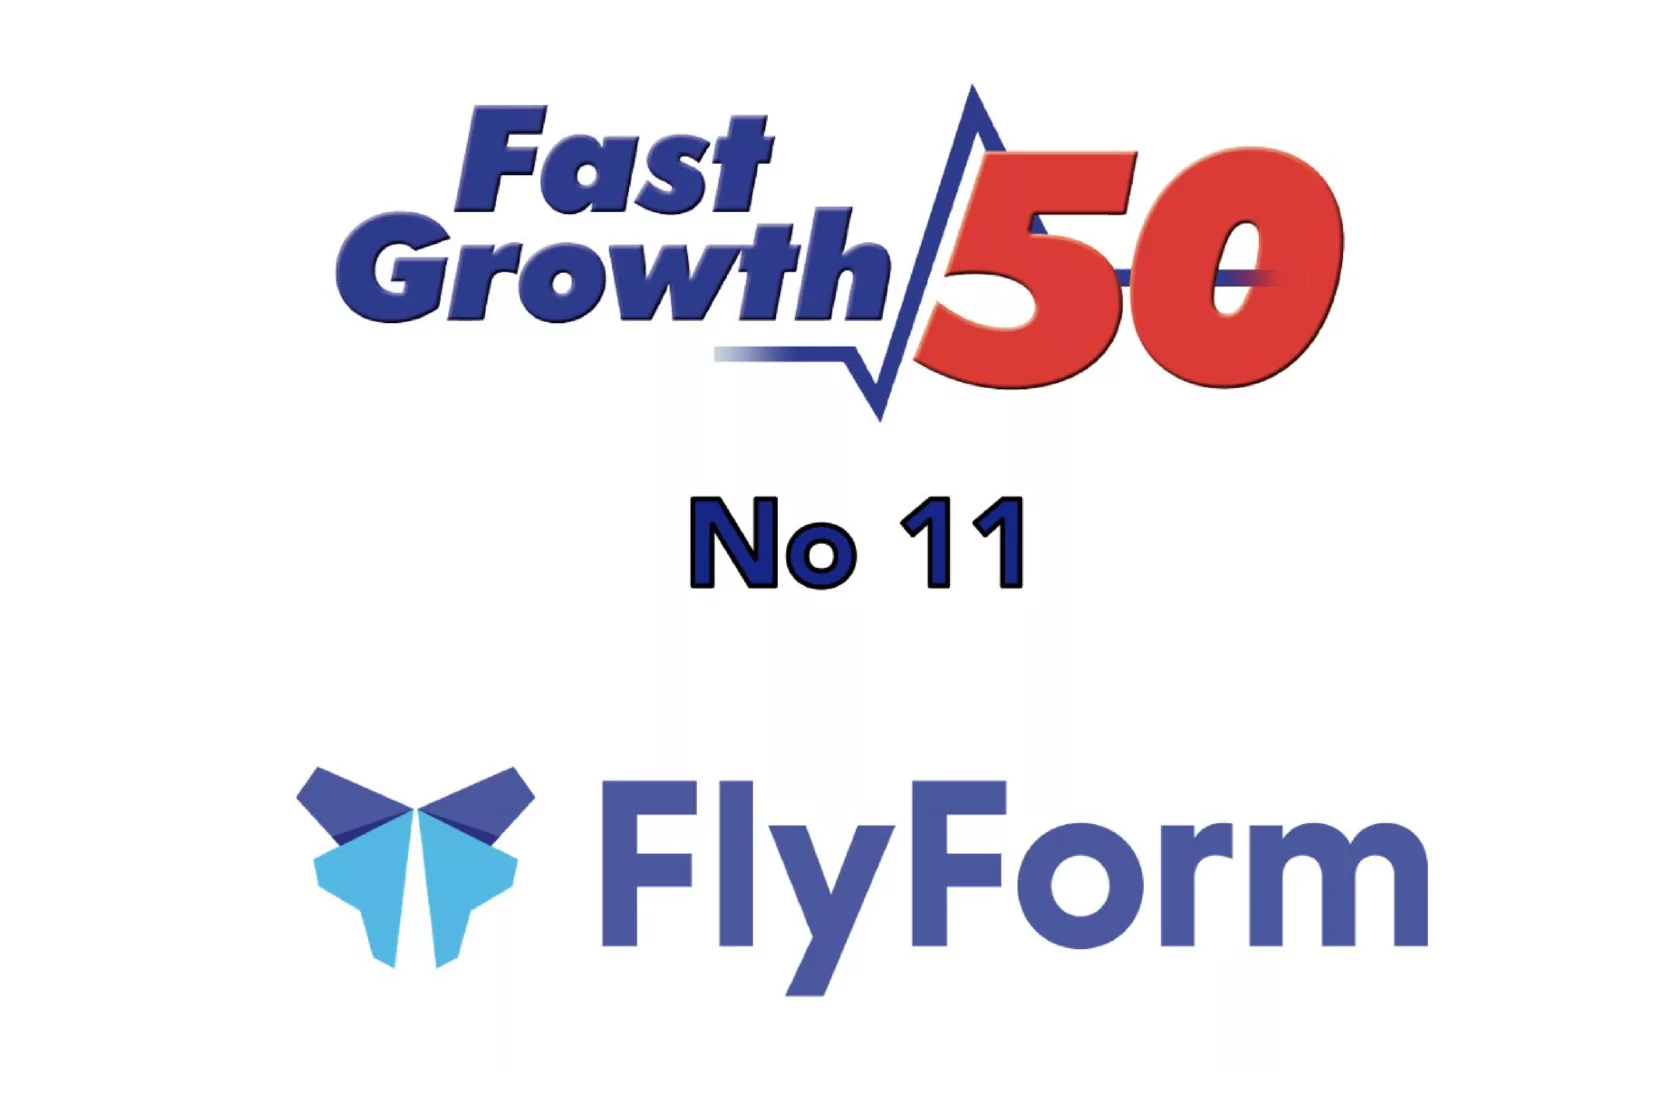 FastGrowth 50 logo recognising FlyForm as 11th fastest growing company in Wales